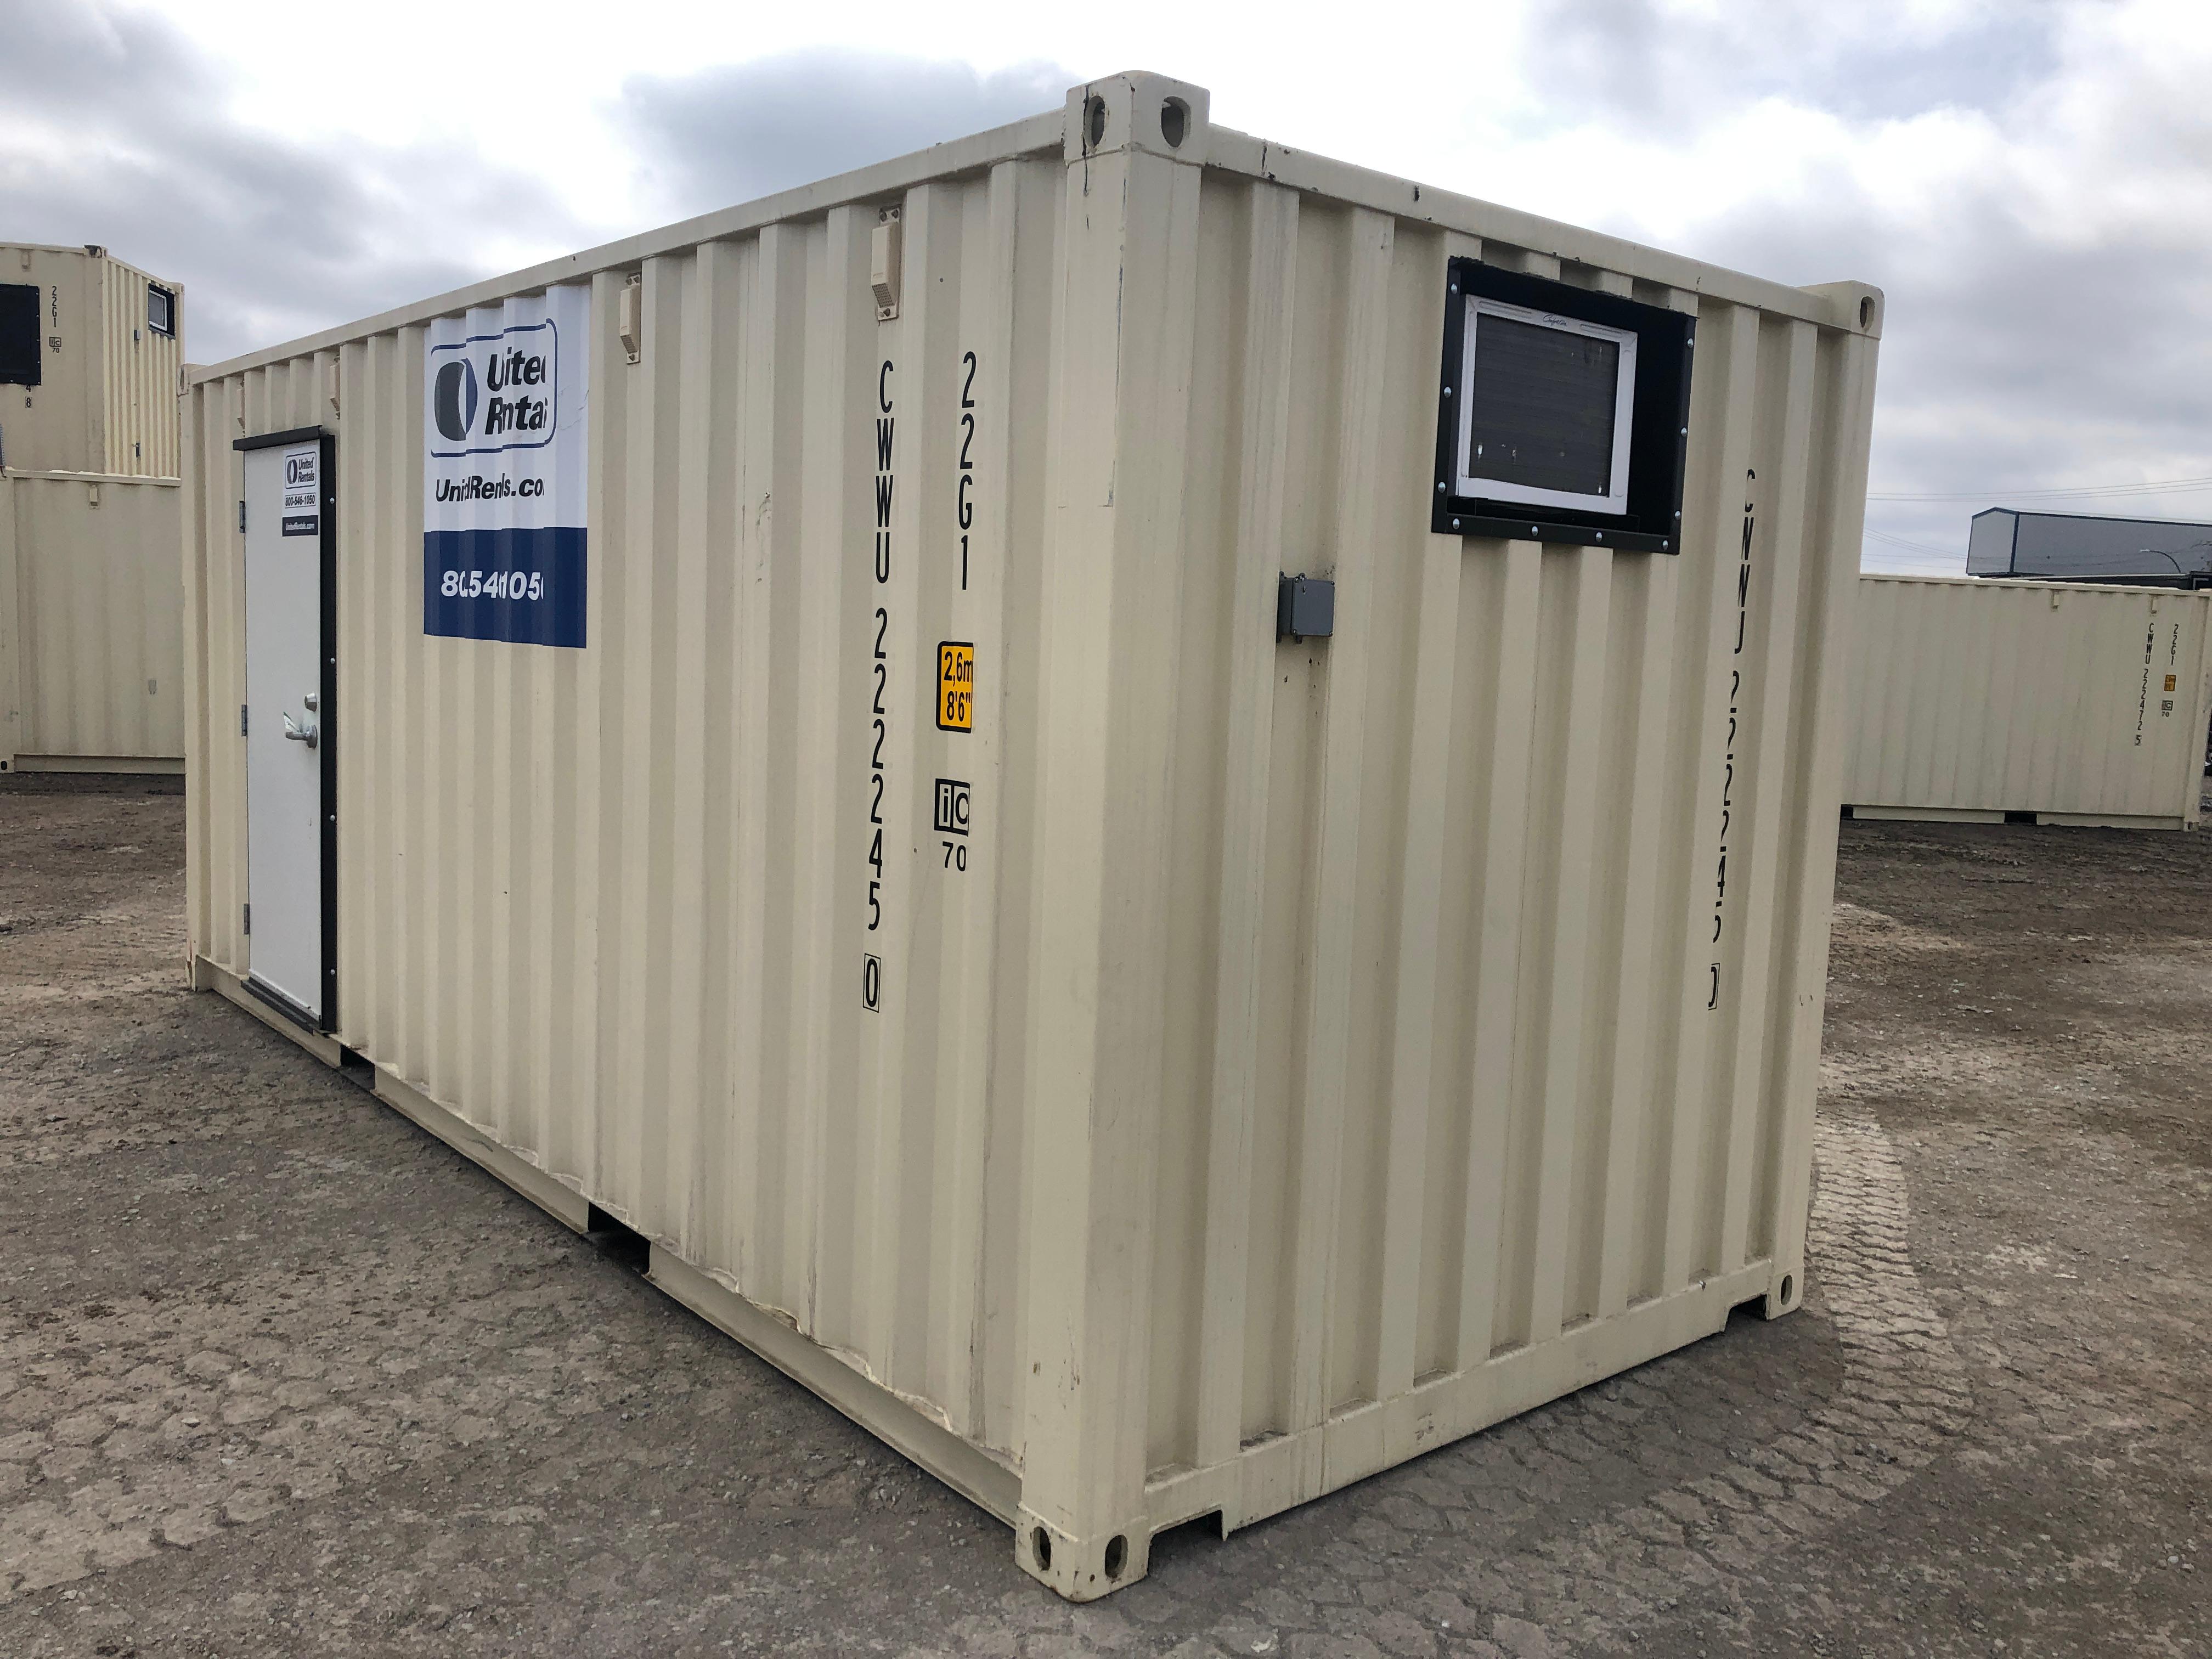 Foto de United Rentals - Storage Containers and Mobile Offices Calgary